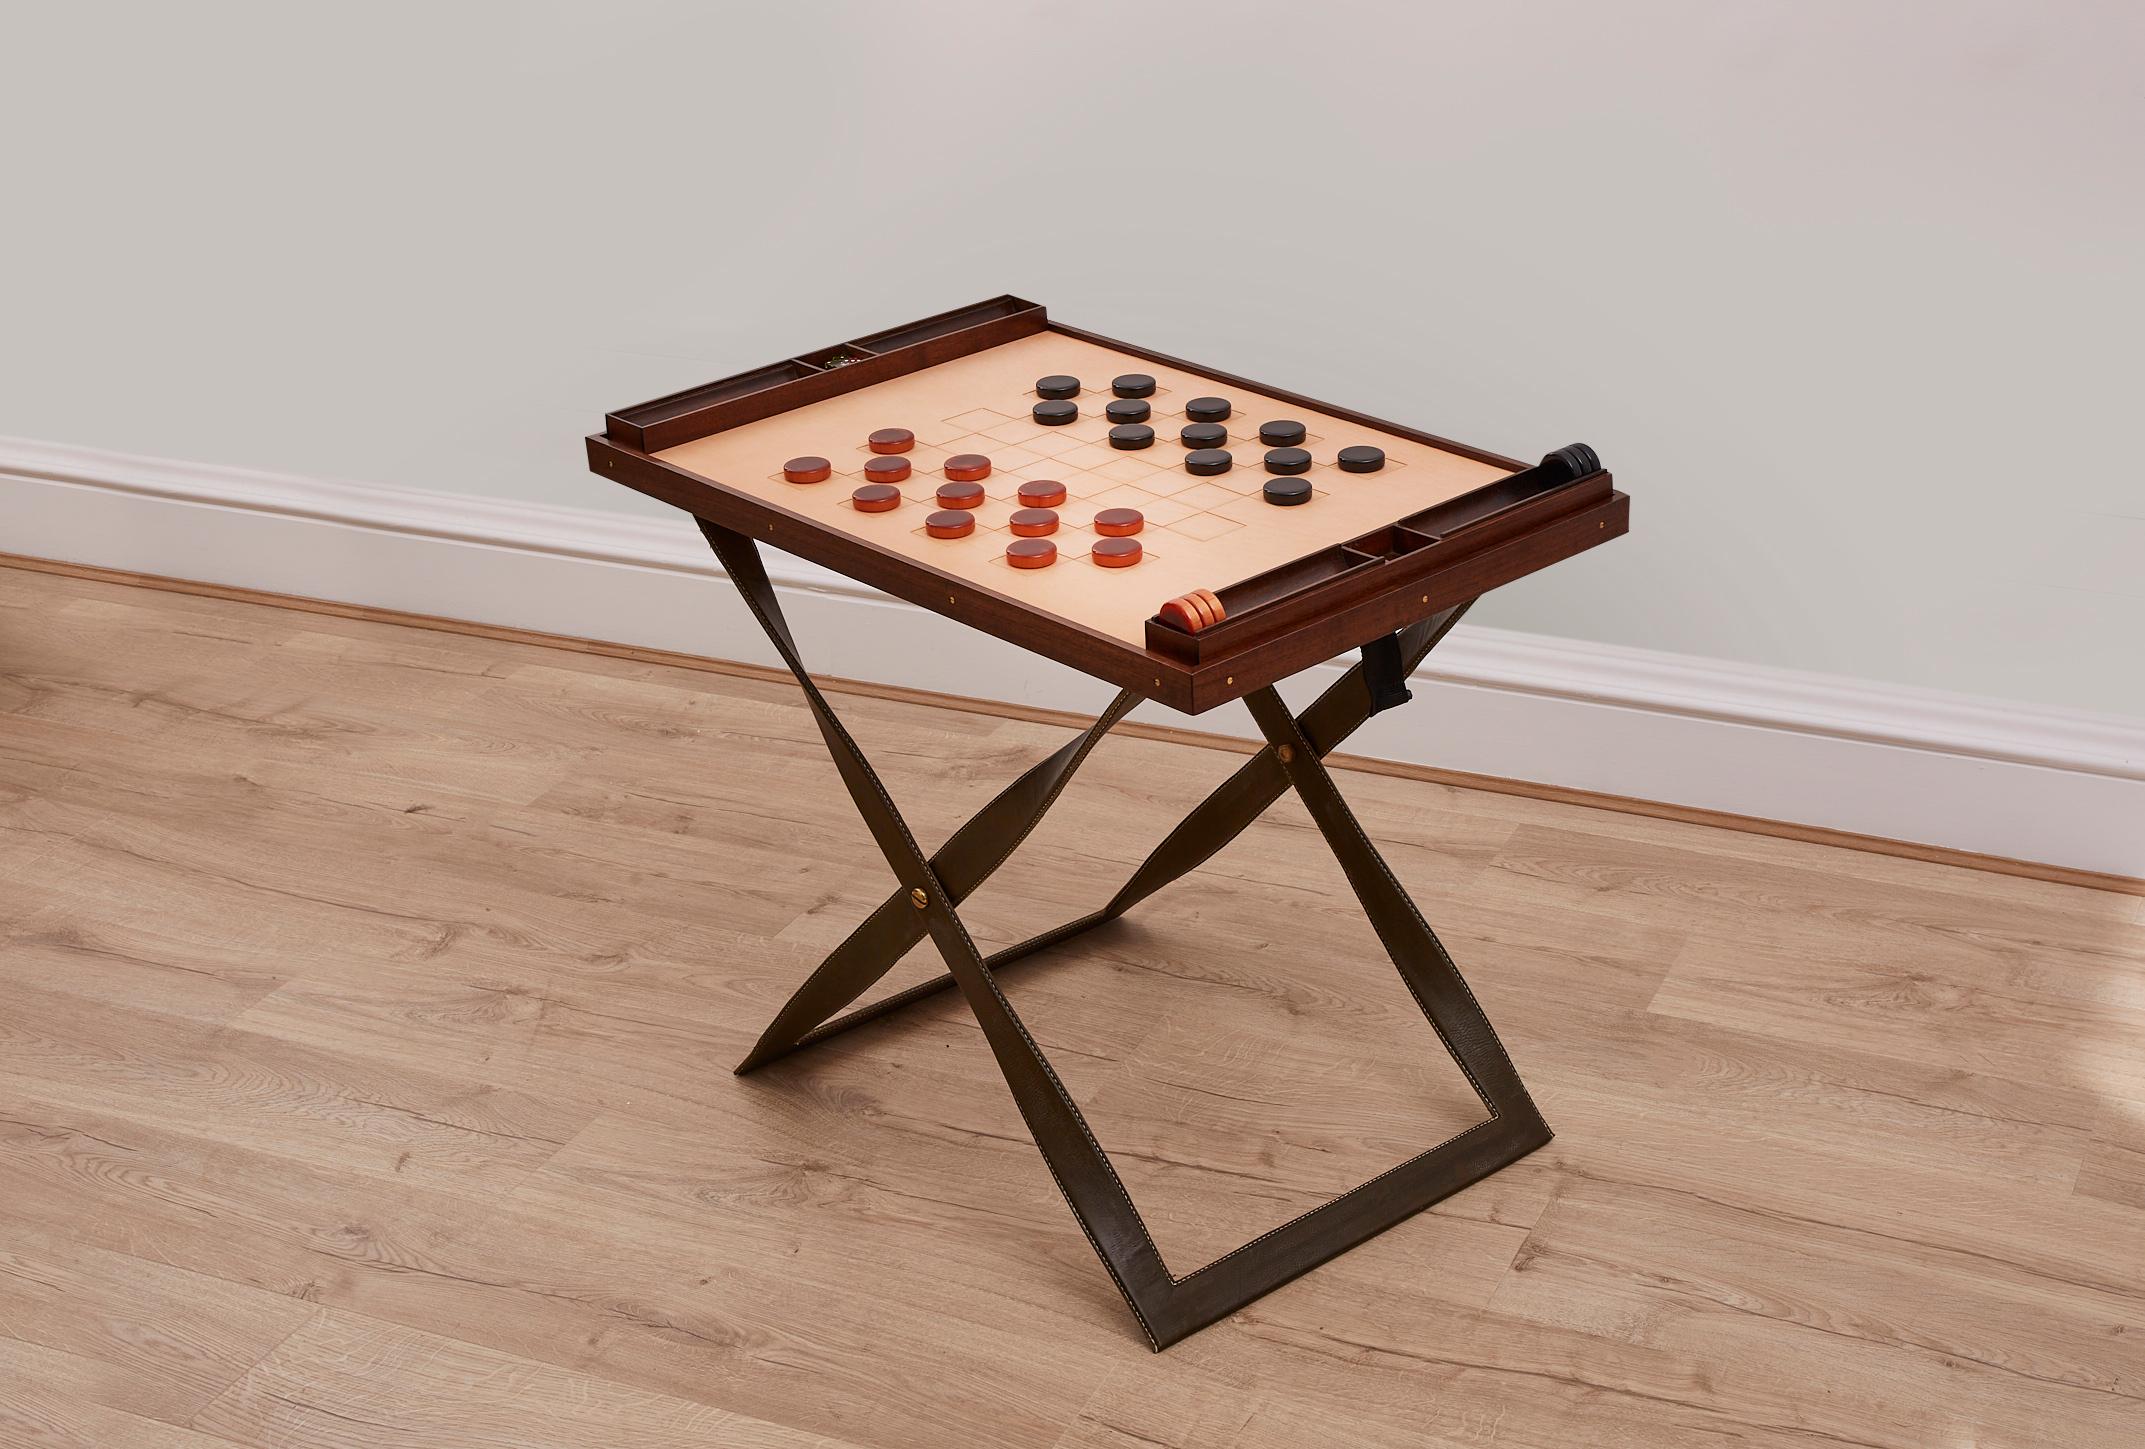 Made to order, these Games tables are of extremely high quality: bespoke made in England, the beautiful walnut and leather finish makes for a sophisticated games experience. reversible top allows for checkers, Chess or backgammon board. The perfect